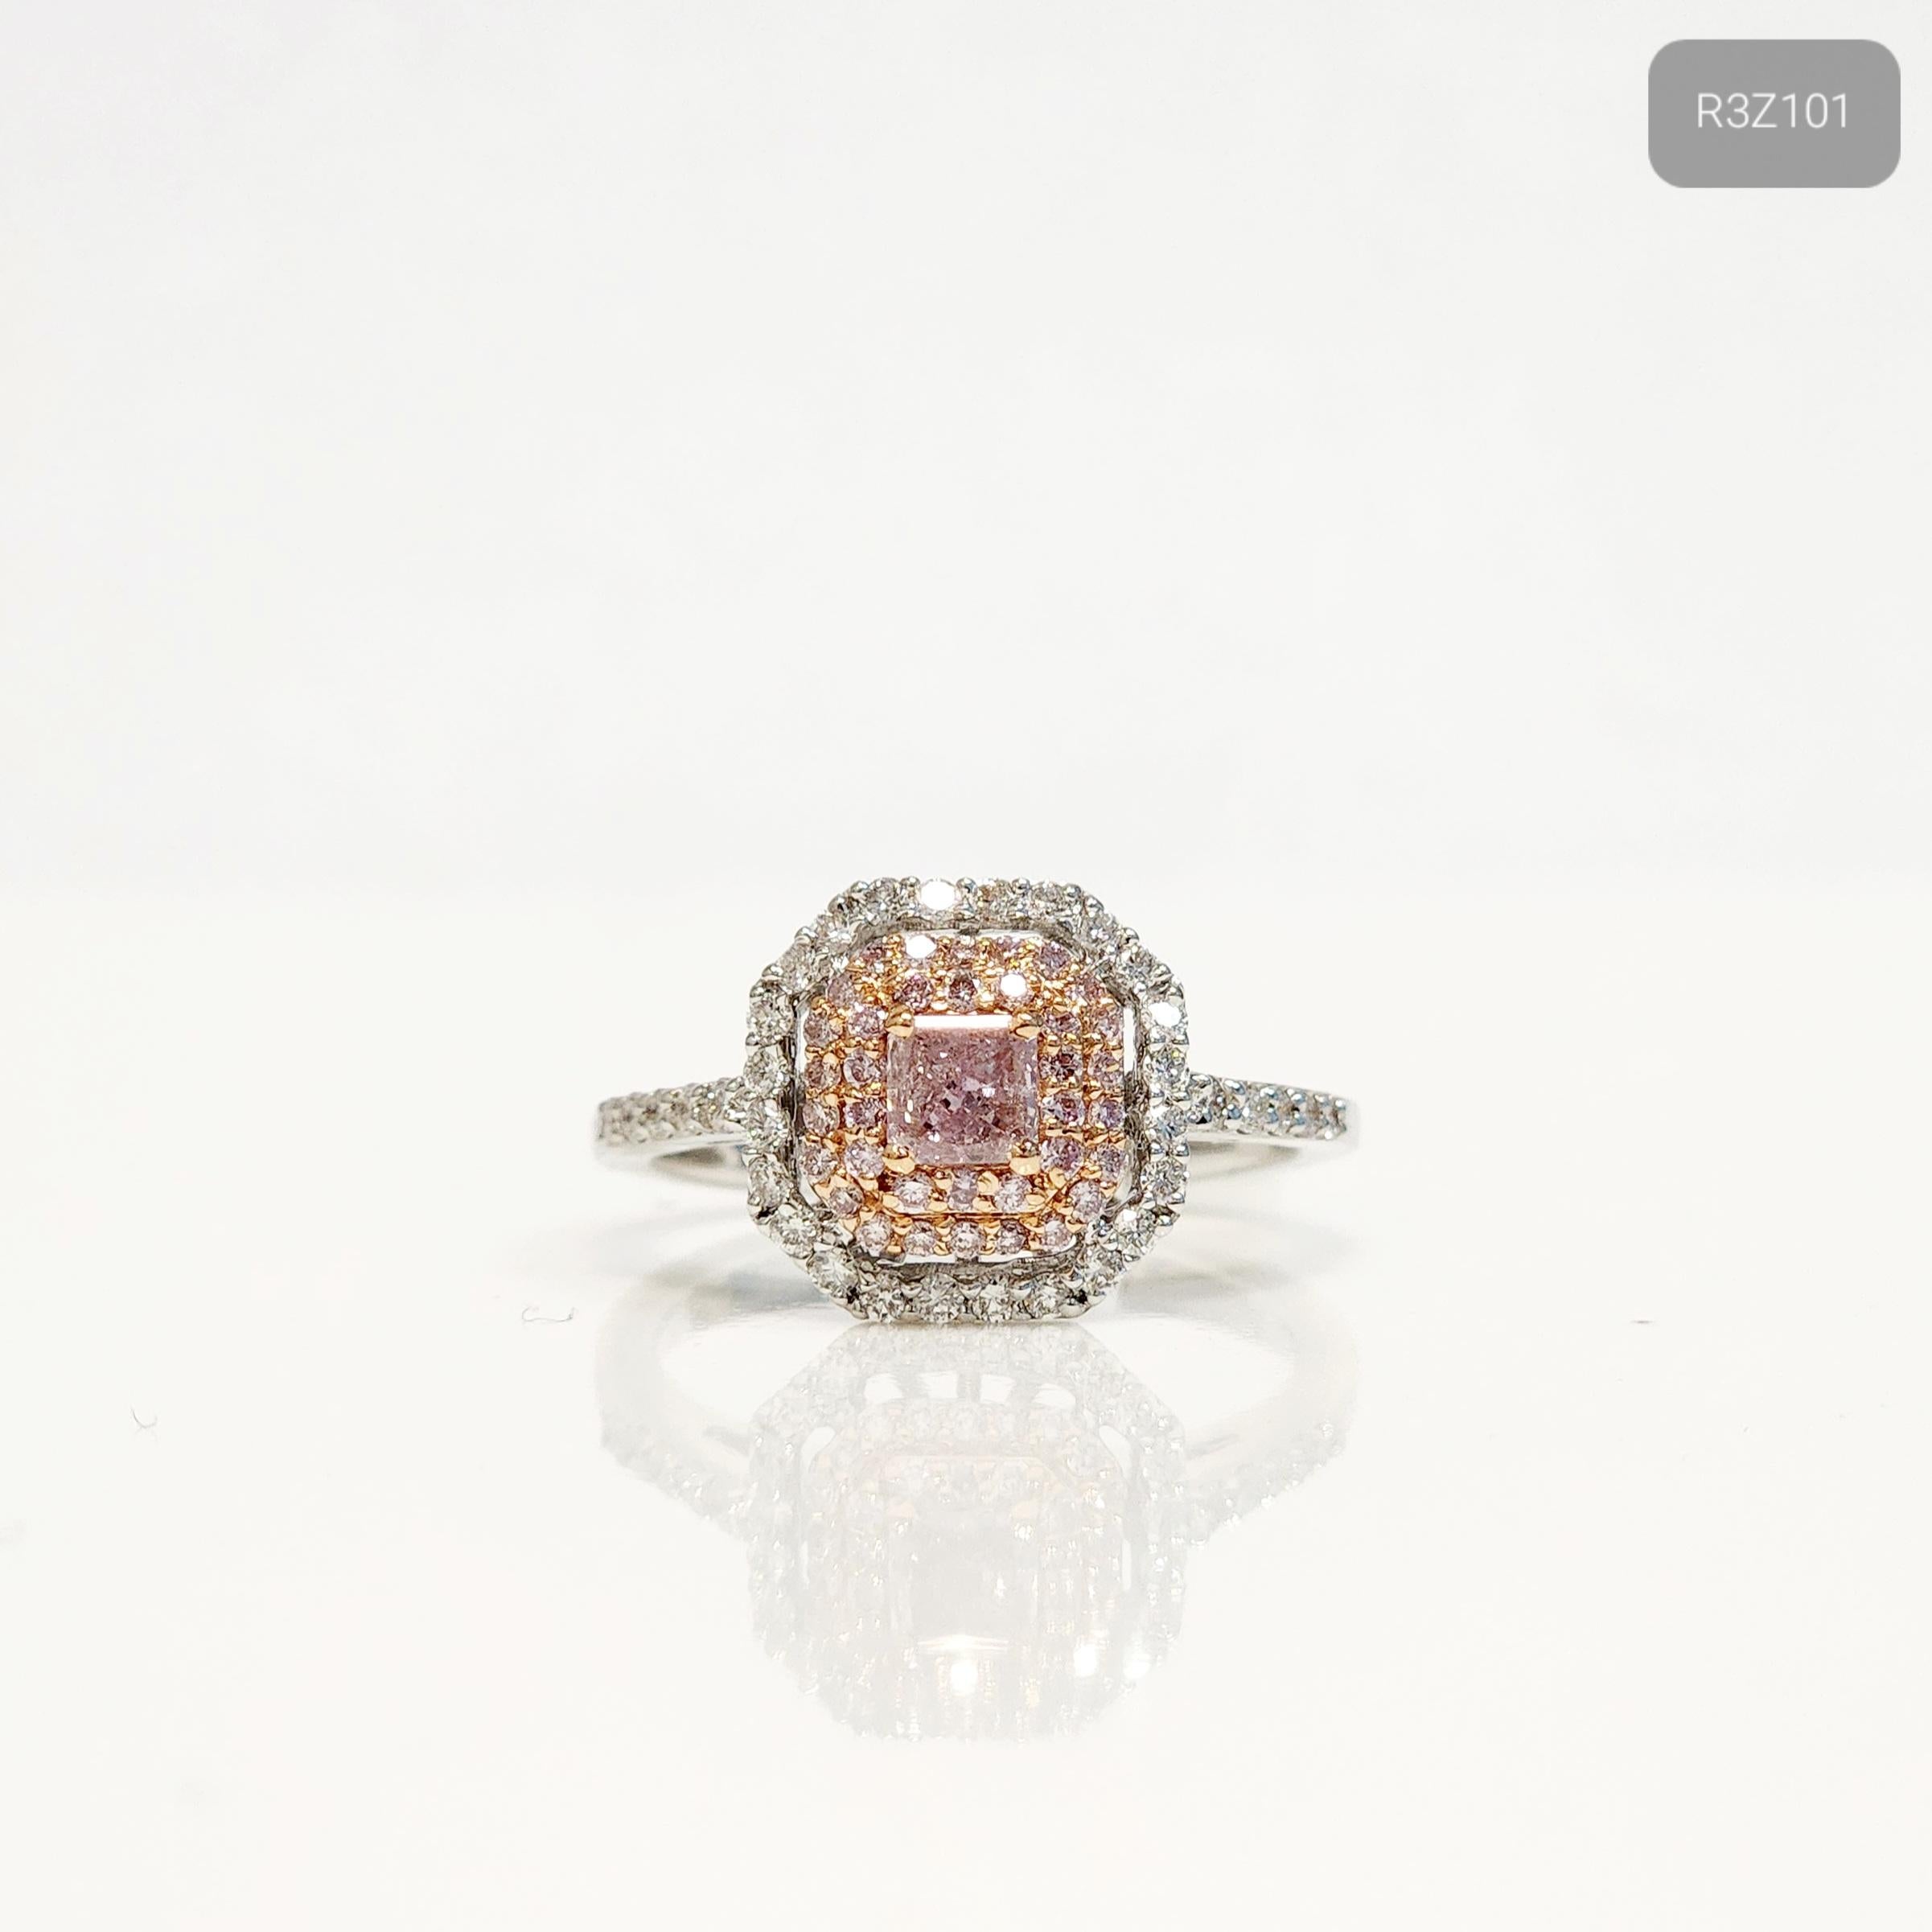 Radiate elegance and grace with our Cushion Shaped Pink Diamond Halo Ring. Featuring a captivating a 0.26 carat square cut pink diamond at its center, this ring is a true showstopper. A halo of shimmering 0.17 carat pink and 0.3 carat white melee